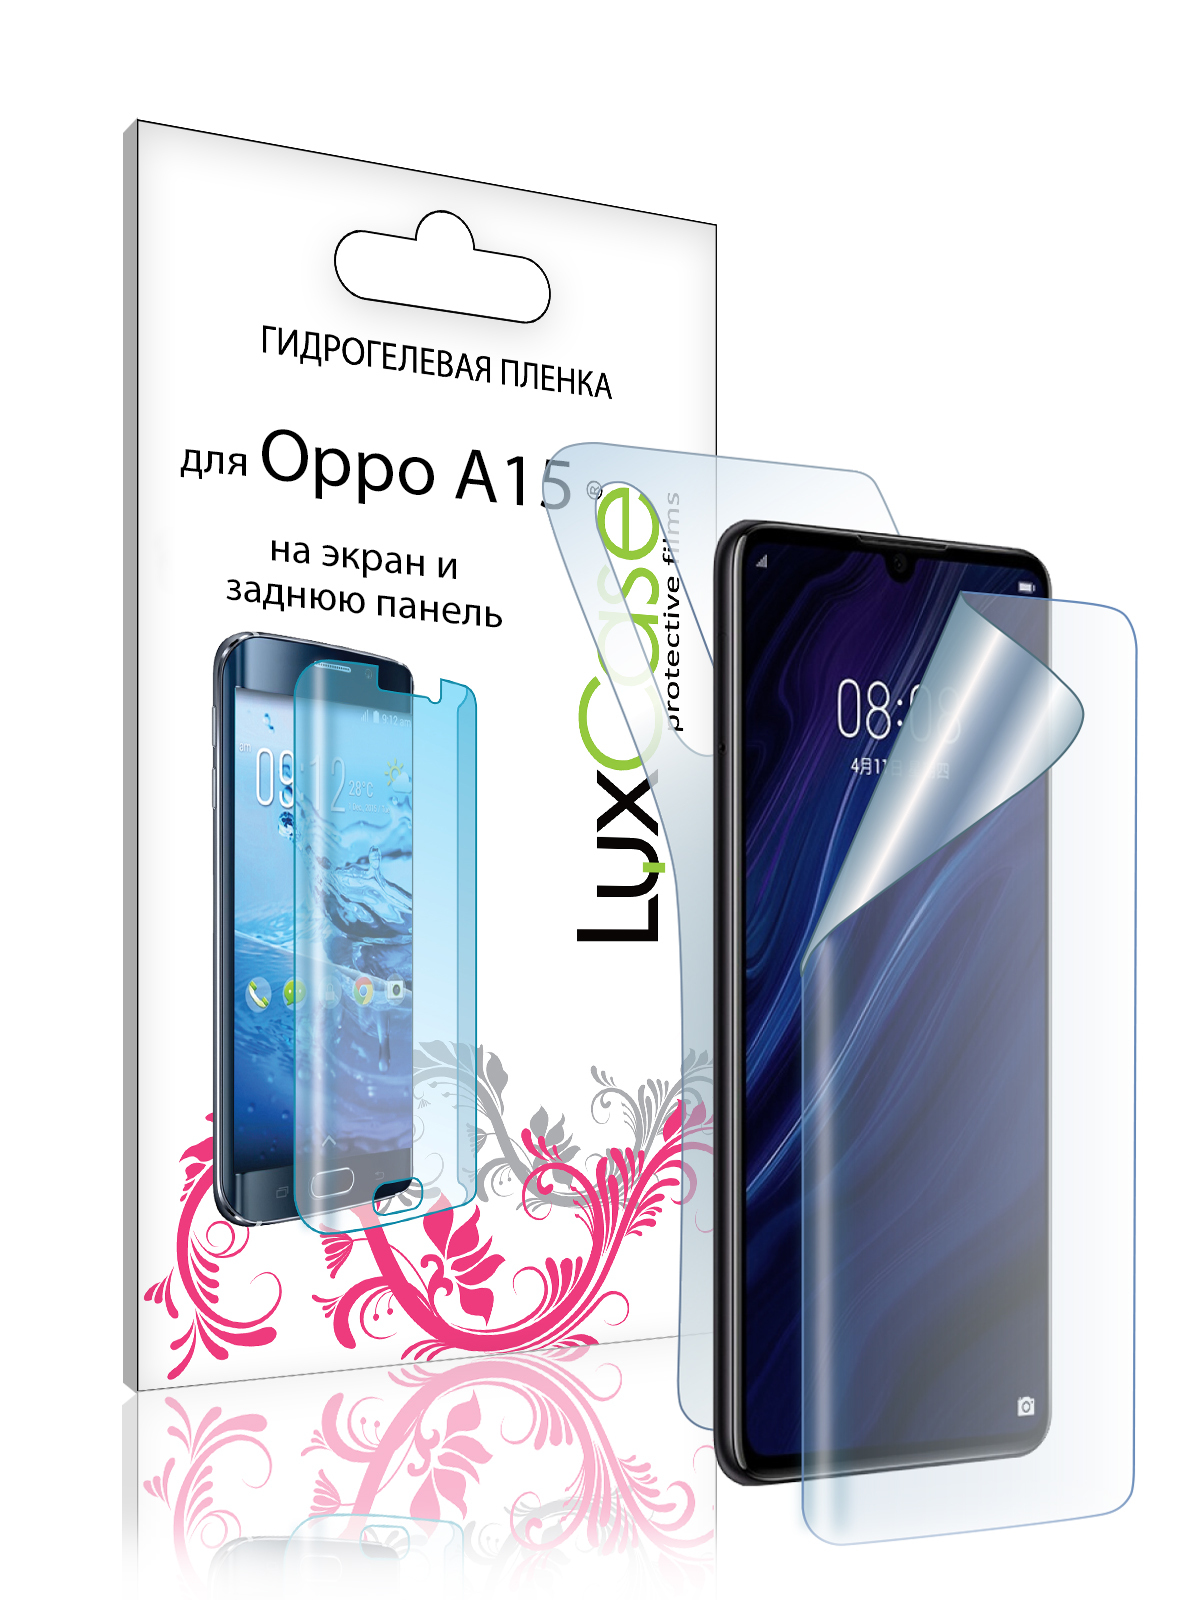 Пленка гидрогелевая LuxCase для Oppo A15 0.14mm Front and Back Transparent 86556 гидрогелевая пленка luxcase для oppo a3s 0 14mm front and back transparent 86976